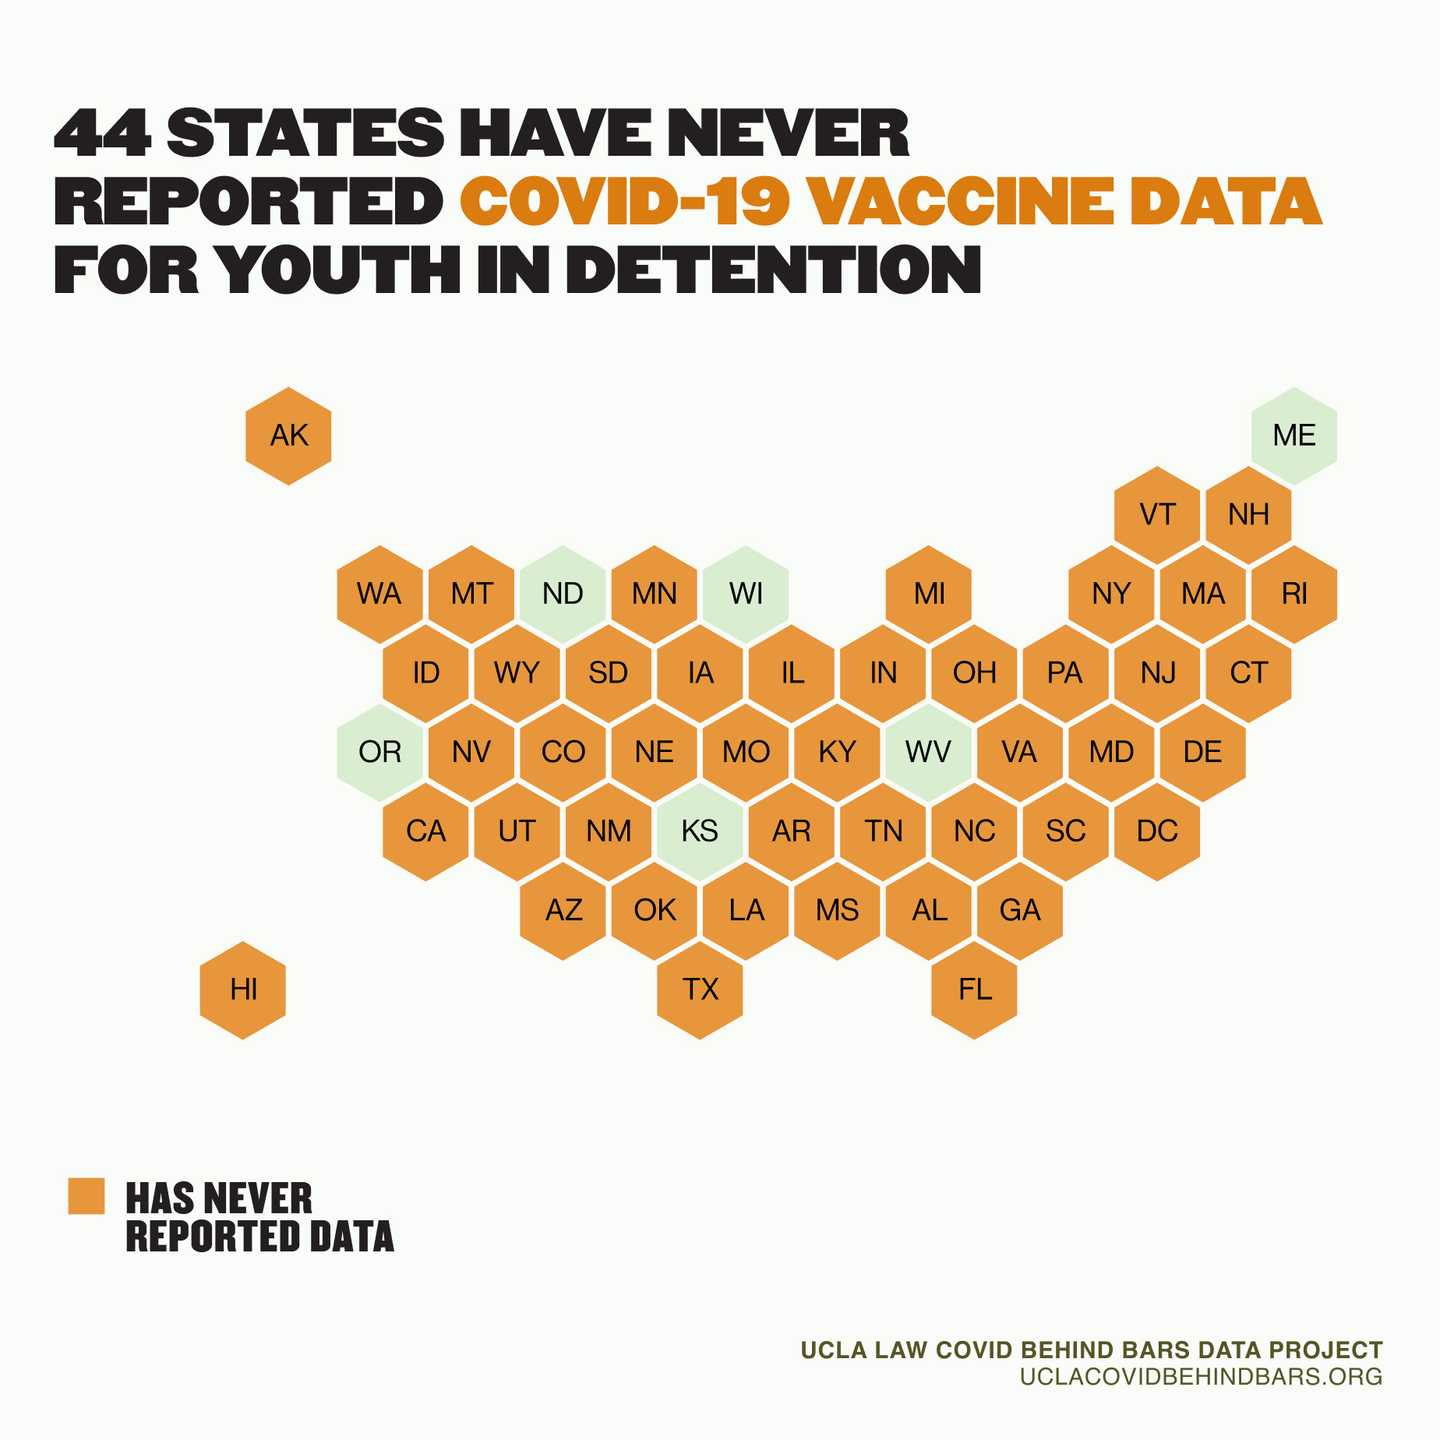 Map of the United States showing that 44 states have never reported COVID-19 vaccine data for youth in detention